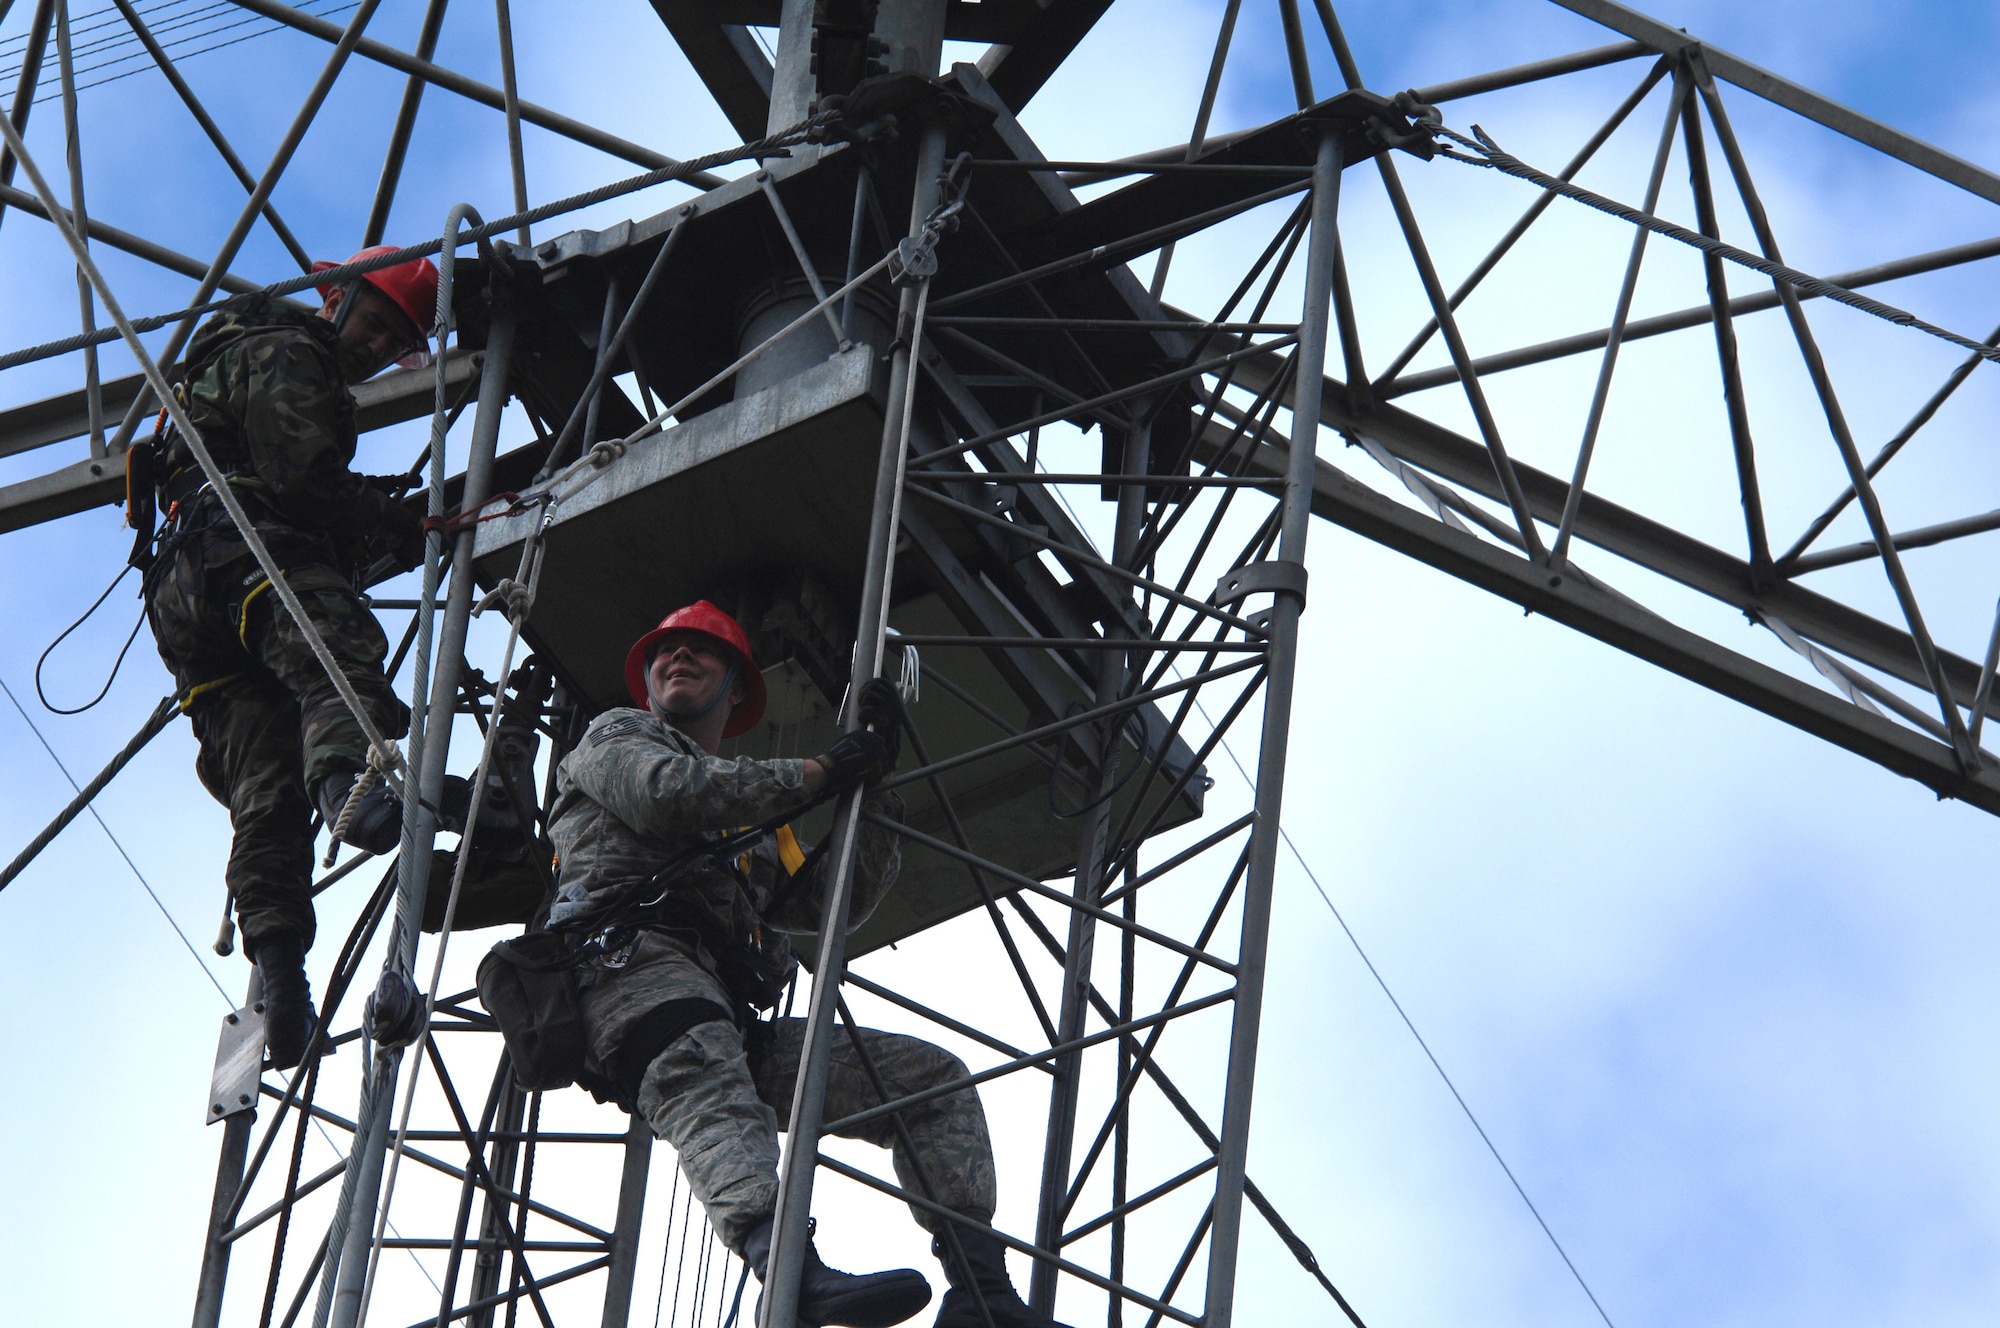 U.S. Air Force Tech. Sgt. Tim Daniel and Staff Sgt. Sean Lavely, 1st Communications Maintenance Squadron, perform annual preventative maintenance inspections on an antenna systems at Royal Air Force Base, Barford in England. They are deployed from Kapaun Air Station, Germany, as part of the Cable and Antenna Theater Maintenance Team who travel routinely throughout Europe maintaining the communications capability force across the Atlantic and on into the European Route. (U.S. Air Force photo by Tech. Sgt. Michael Voss)